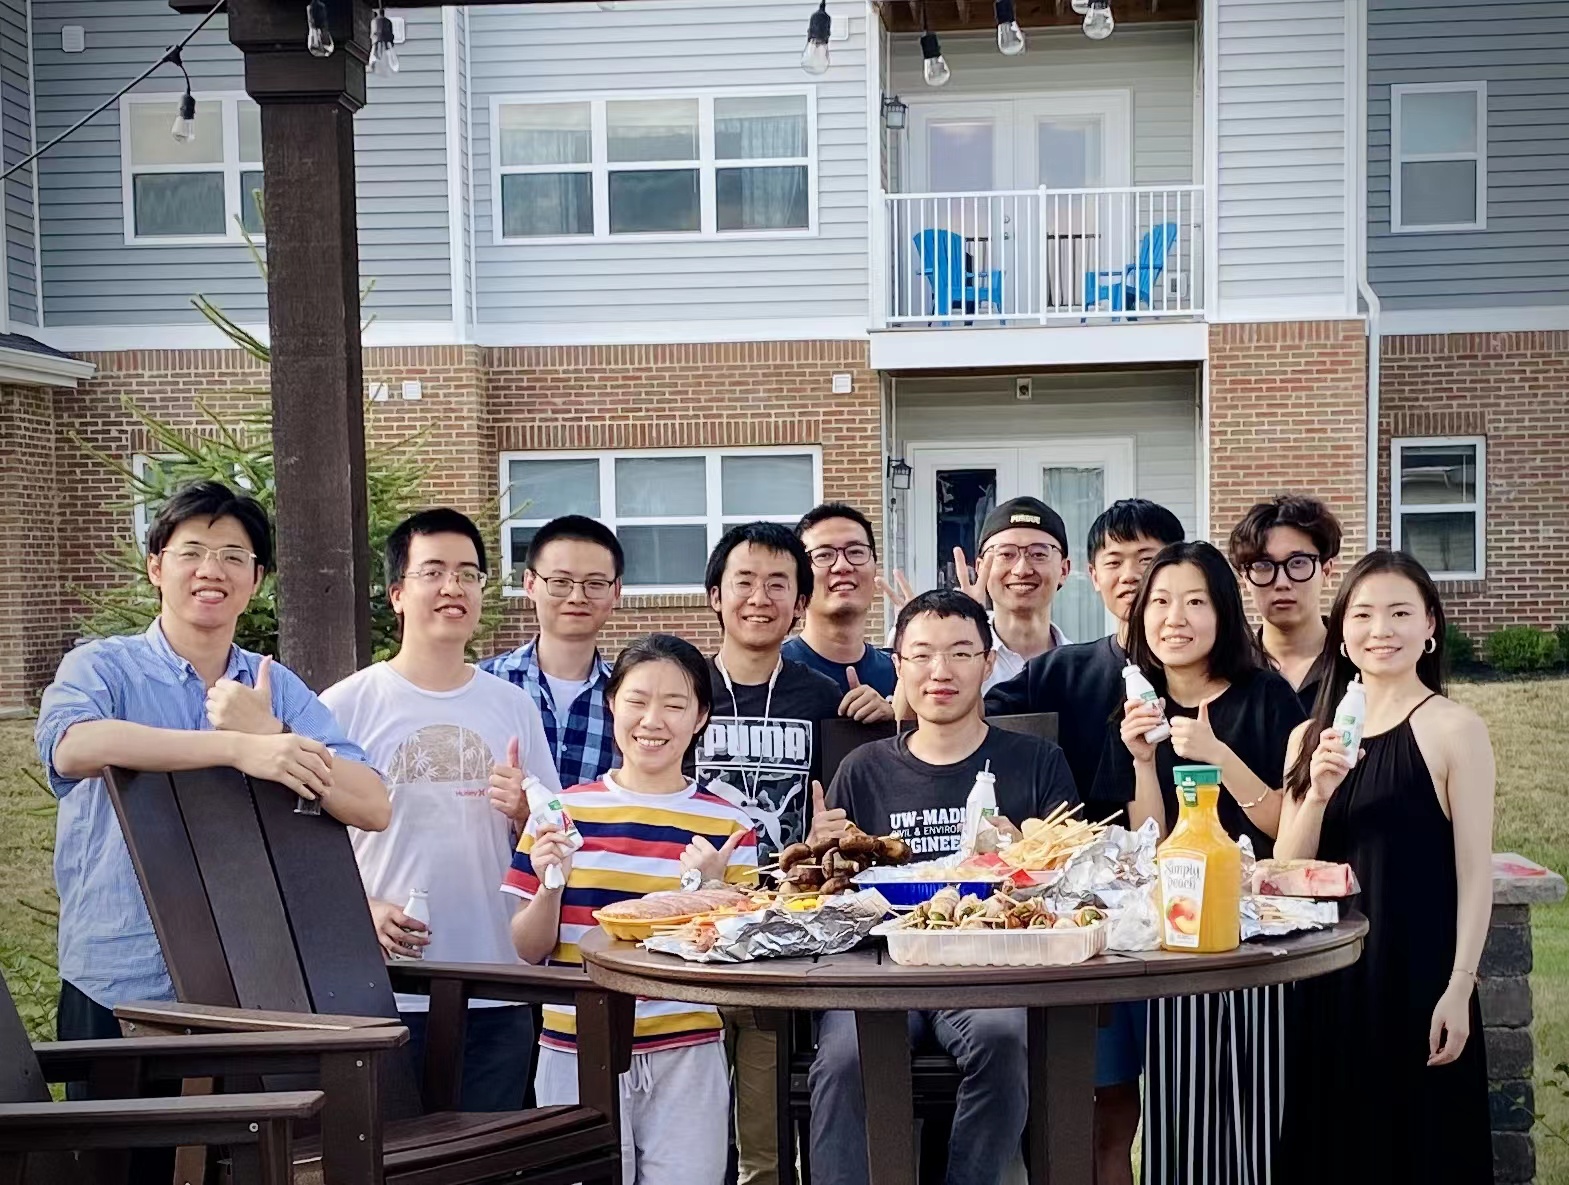 Summer BBQ party, cheers!